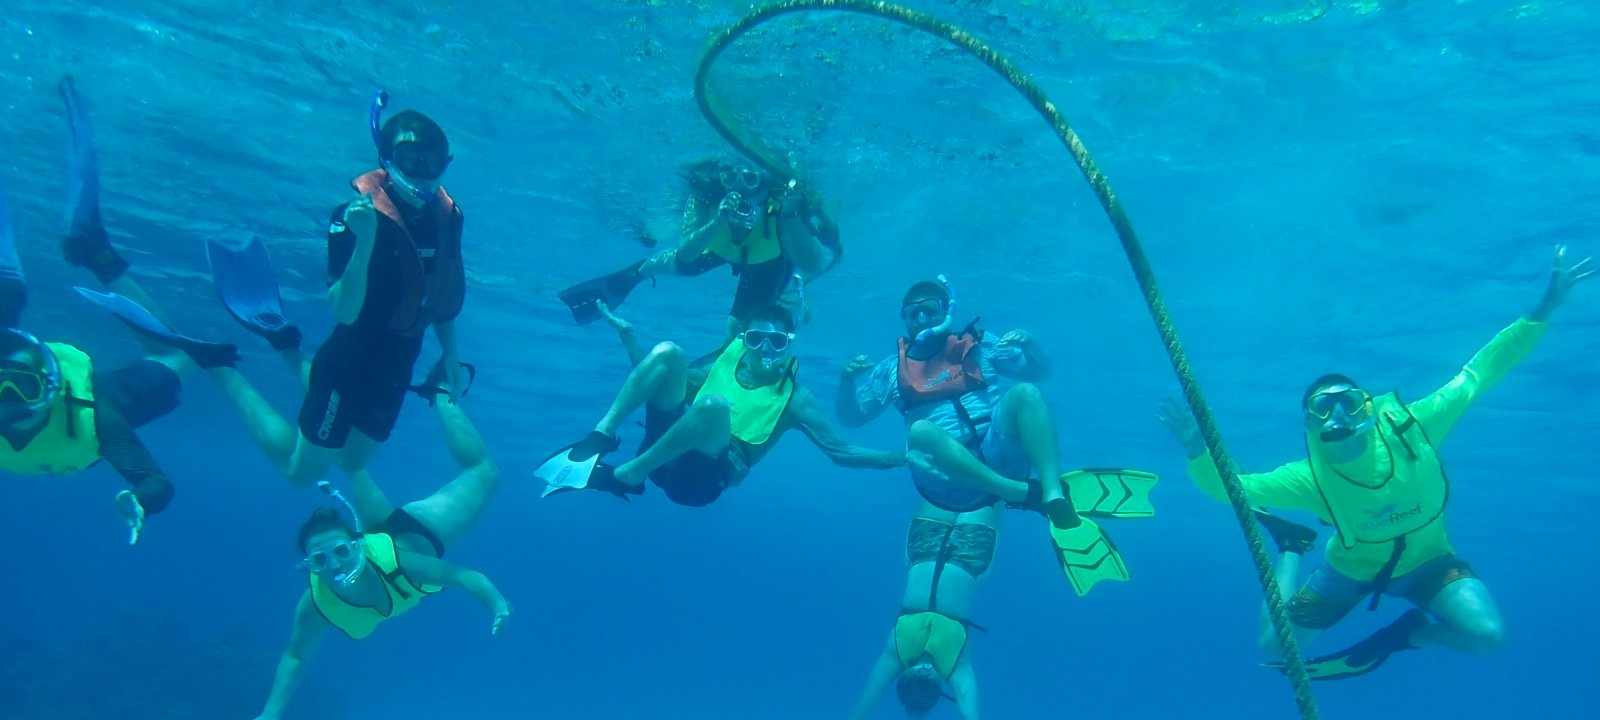 Students snorkeling in the Bahamas during study abroad.